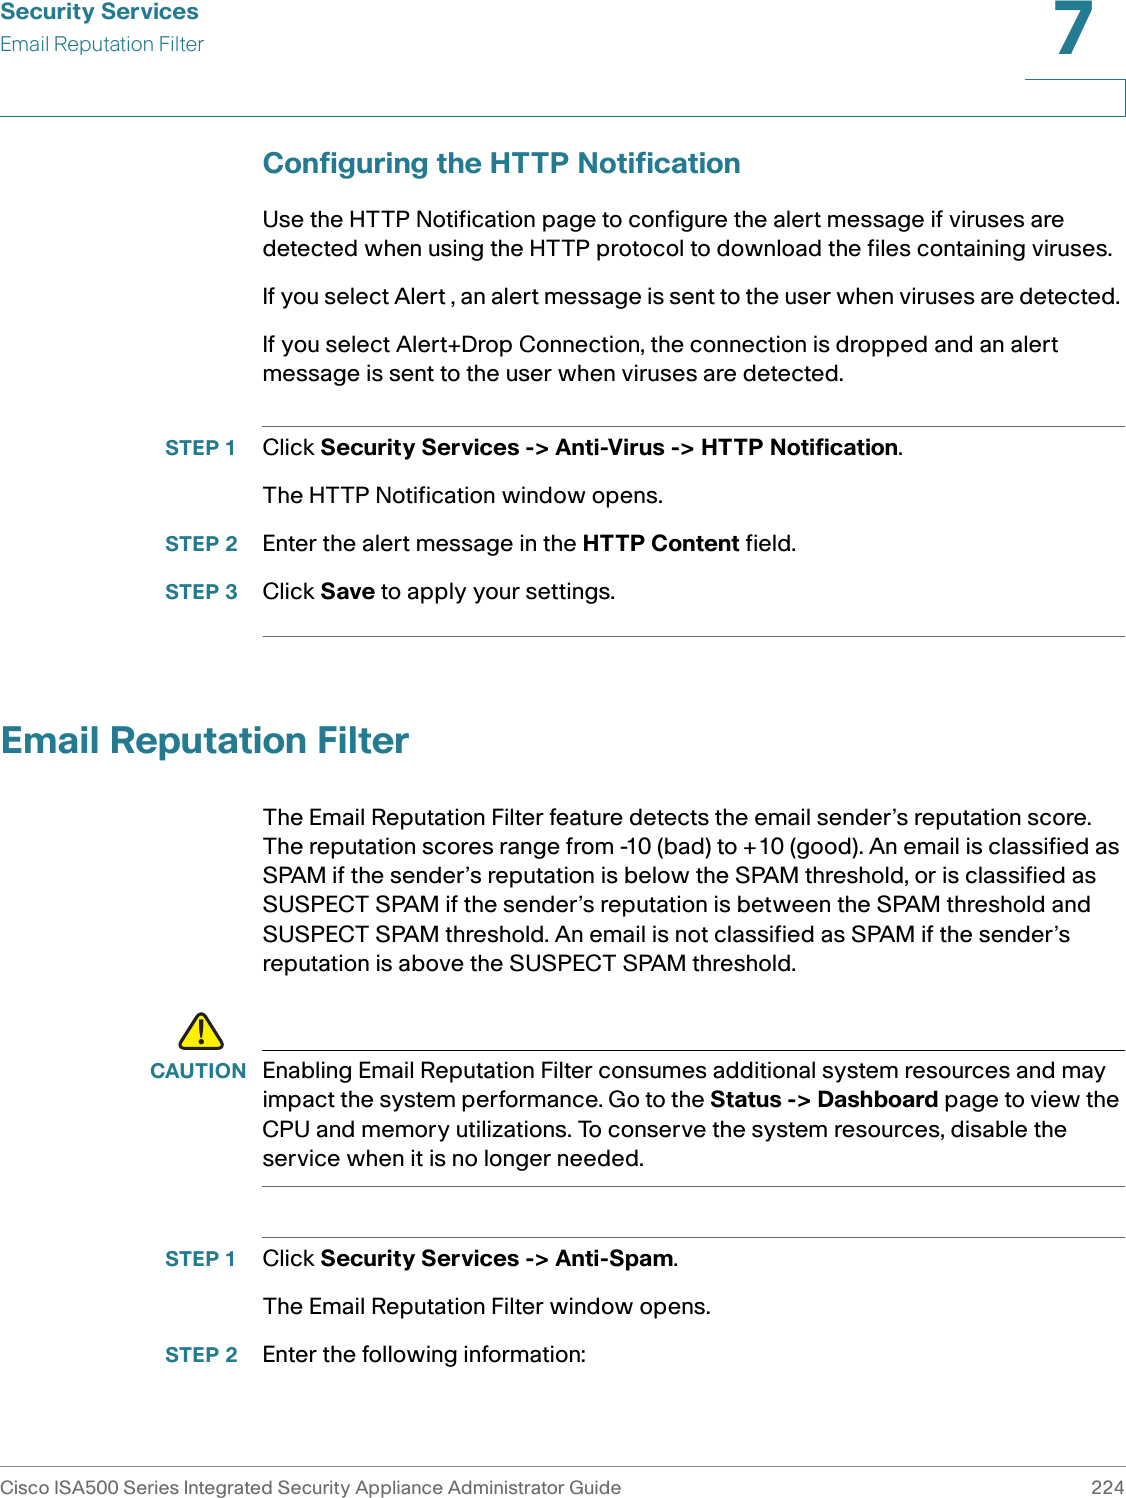 Security ServicesEmail Reputation FilterCisco ISA500 Series Integrated Security Appliance Administrator Guide 2247 Configuring the HTTP NotificationUse the HTTP Notification page to configure the alert message if viruses are detected when using the HTTP protocol to download the files containing viruses. If you select Alert , an alert message is sent to the user when viruses are detected. If you select Alert+Drop Connection, the connection is dropped and an alert message is sent to the user when viruses are detected. STEP 1 Click Security Services -&gt; Anti-Virus -&gt; HTTP Notification. The HTTP Notification window opens. STEP 2 Enter the alert message in the HTTP Content field. STEP 3 Click Save to apply your settings. Email Reputation FilterThe Email Reputation Filter feature detects the email sender’s reputation score. The reputation scores range from -10 (bad) to +10 (good). An email is classified as SPAM if the sender’s reputation is below the SPAM threshold, or is classified as SUSPECT SPAM if the sender’s reputation is between the SPAM threshold and SUSPECT SPAM threshold. An email is not classified as SPAM if the sender’s reputation is above the SUSPECT SPAM threshold. !CAUTION Enabling Email Reputation Filter consumes additional system resources and may impact the system performance. Go to the Status -&gt; Dashboard page to view the CPU and memory utilizations. To conserve the system resources, disable the service when it is no longer needed.STEP 1 Click Security Services -&gt; Anti-Spam. The Email Reputation Filter window opens. STEP 2 Enter the following information: 